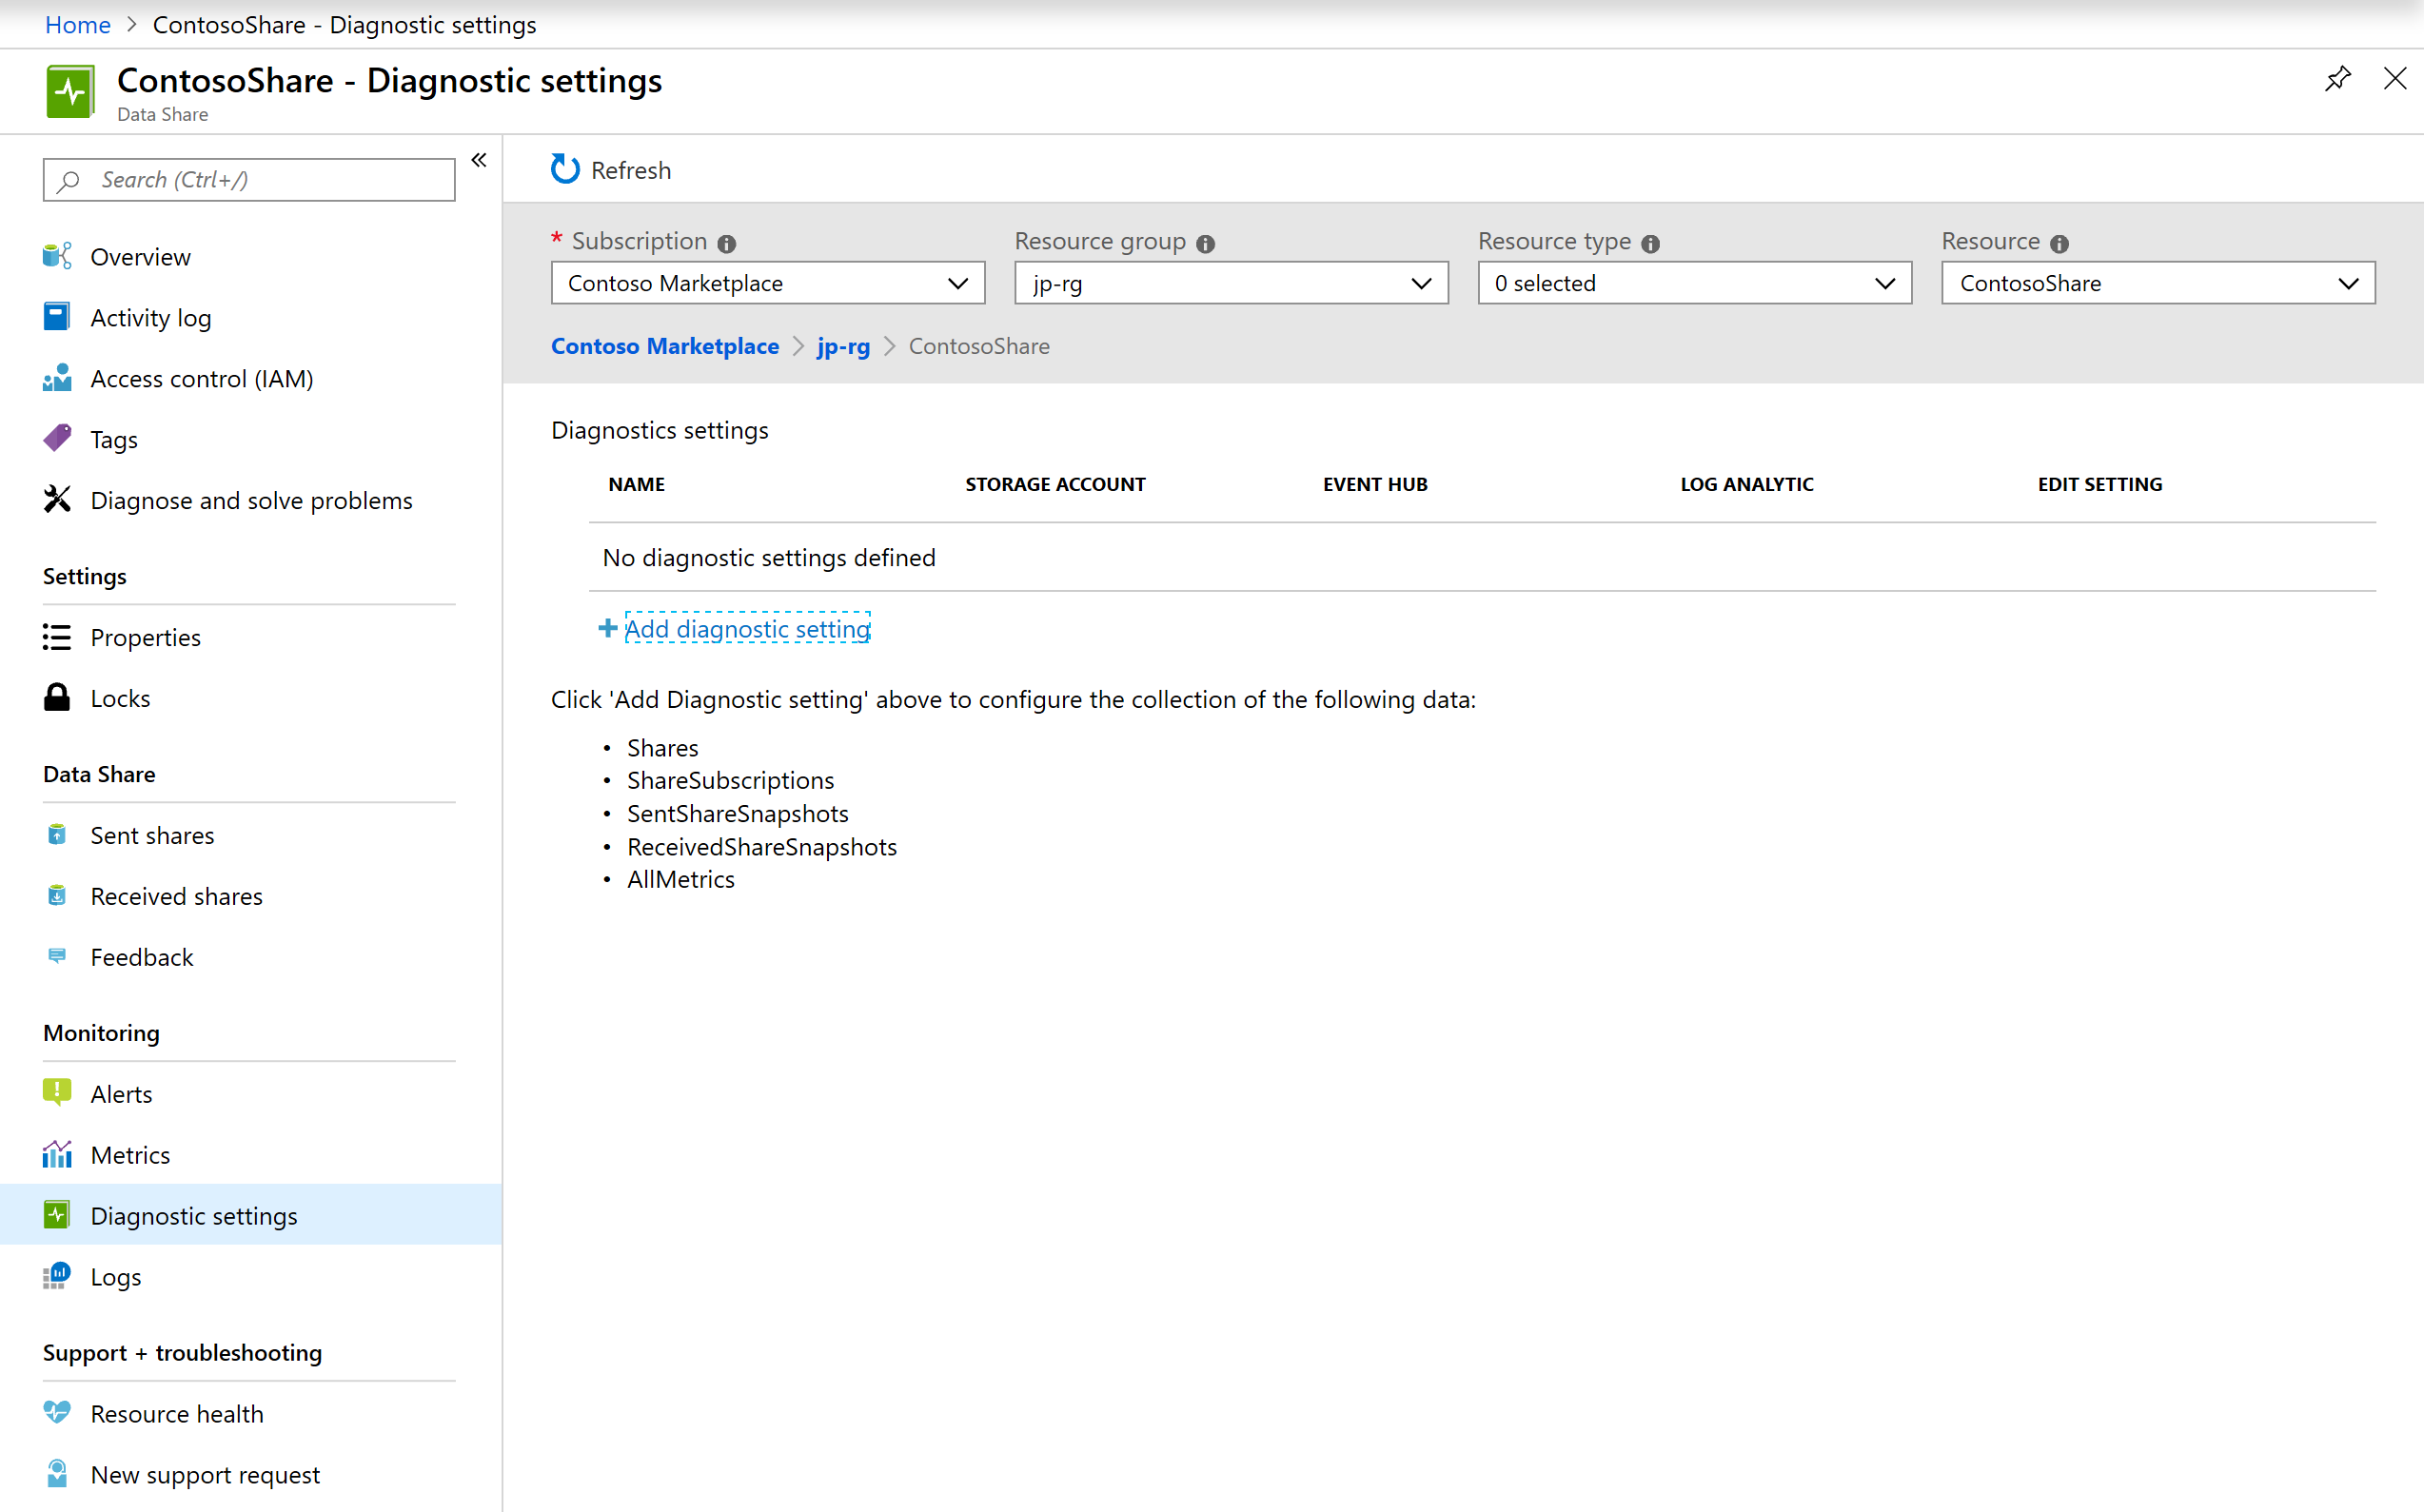 Screenshot shows the Diagnostic settings page in the Azure portal.